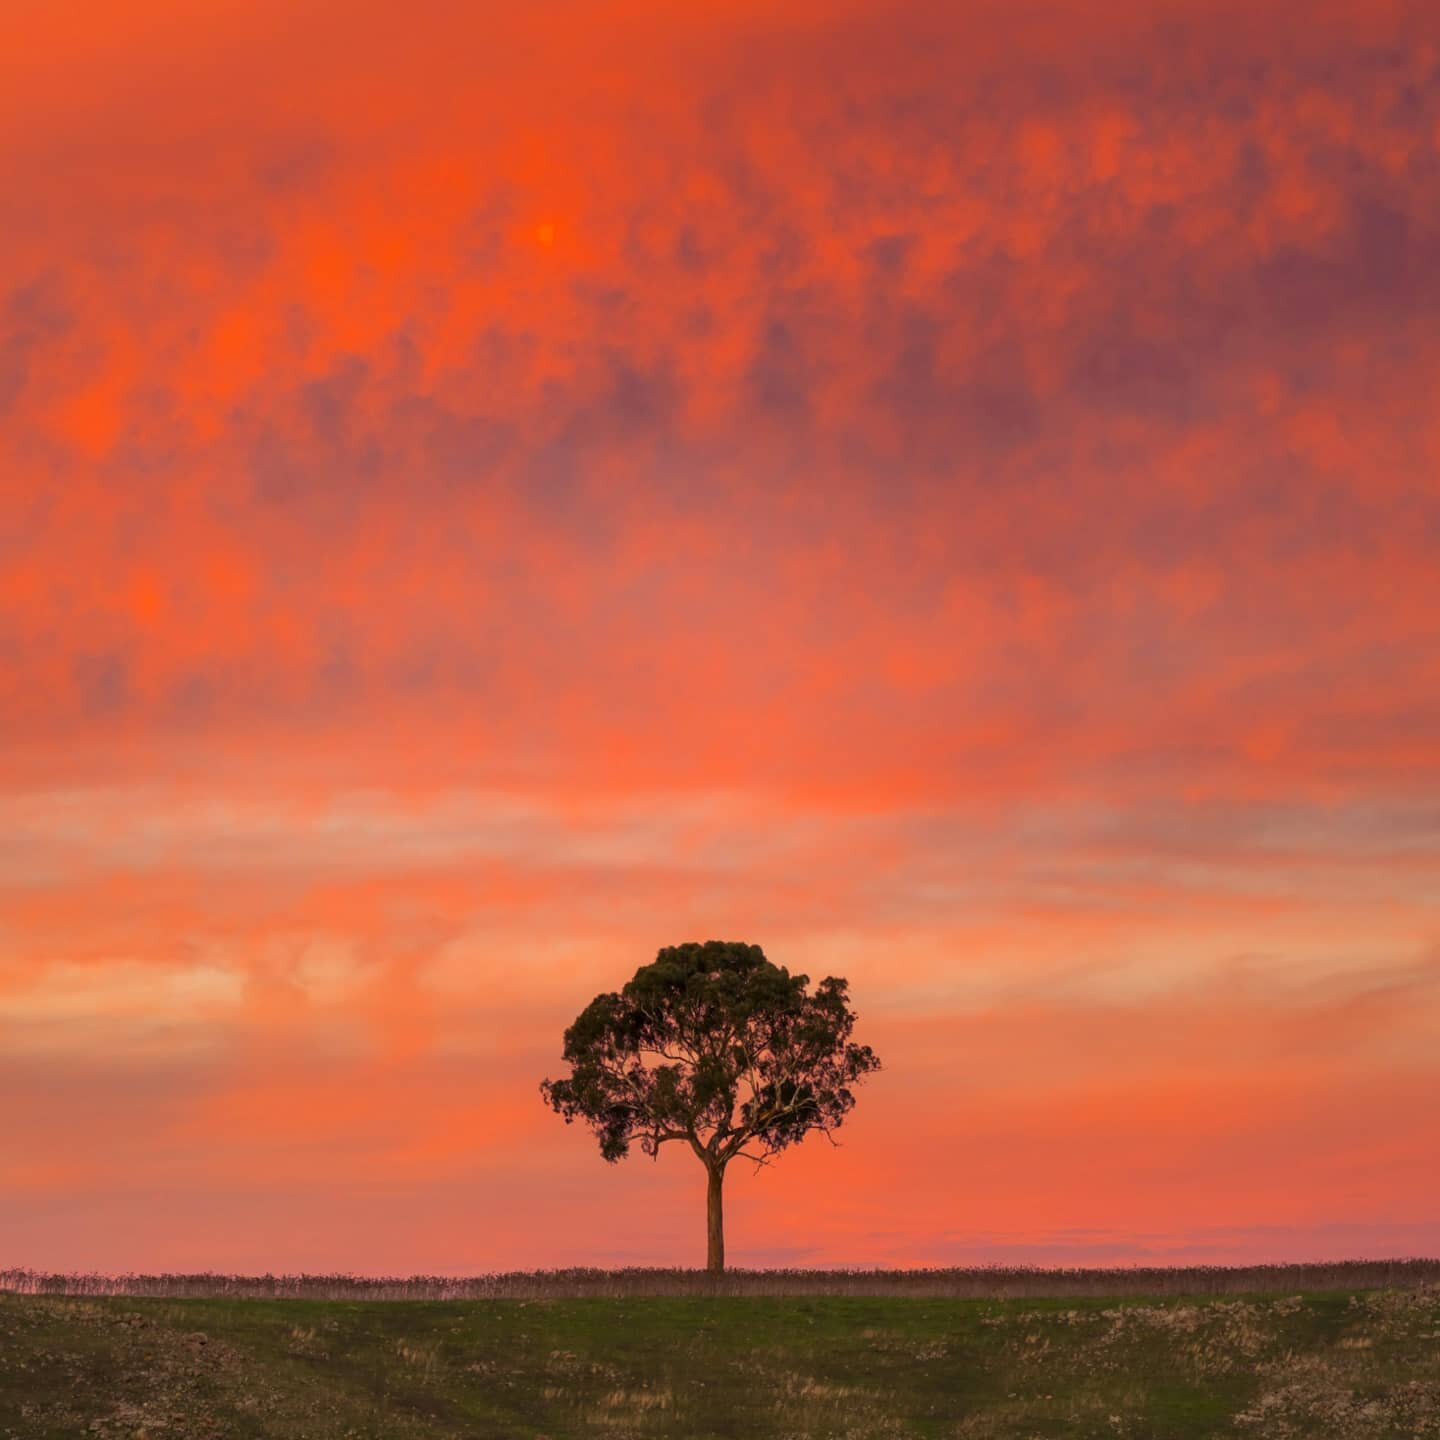 Taken recently on my uncle's farm just out of Canberra near Murrumbateman during an intense sunset. I shot this one handheld, only because I couldn't be bothered going back to the car to get my tripod out 🤭 My @sonyalpha.anz A7R IV had no problems s